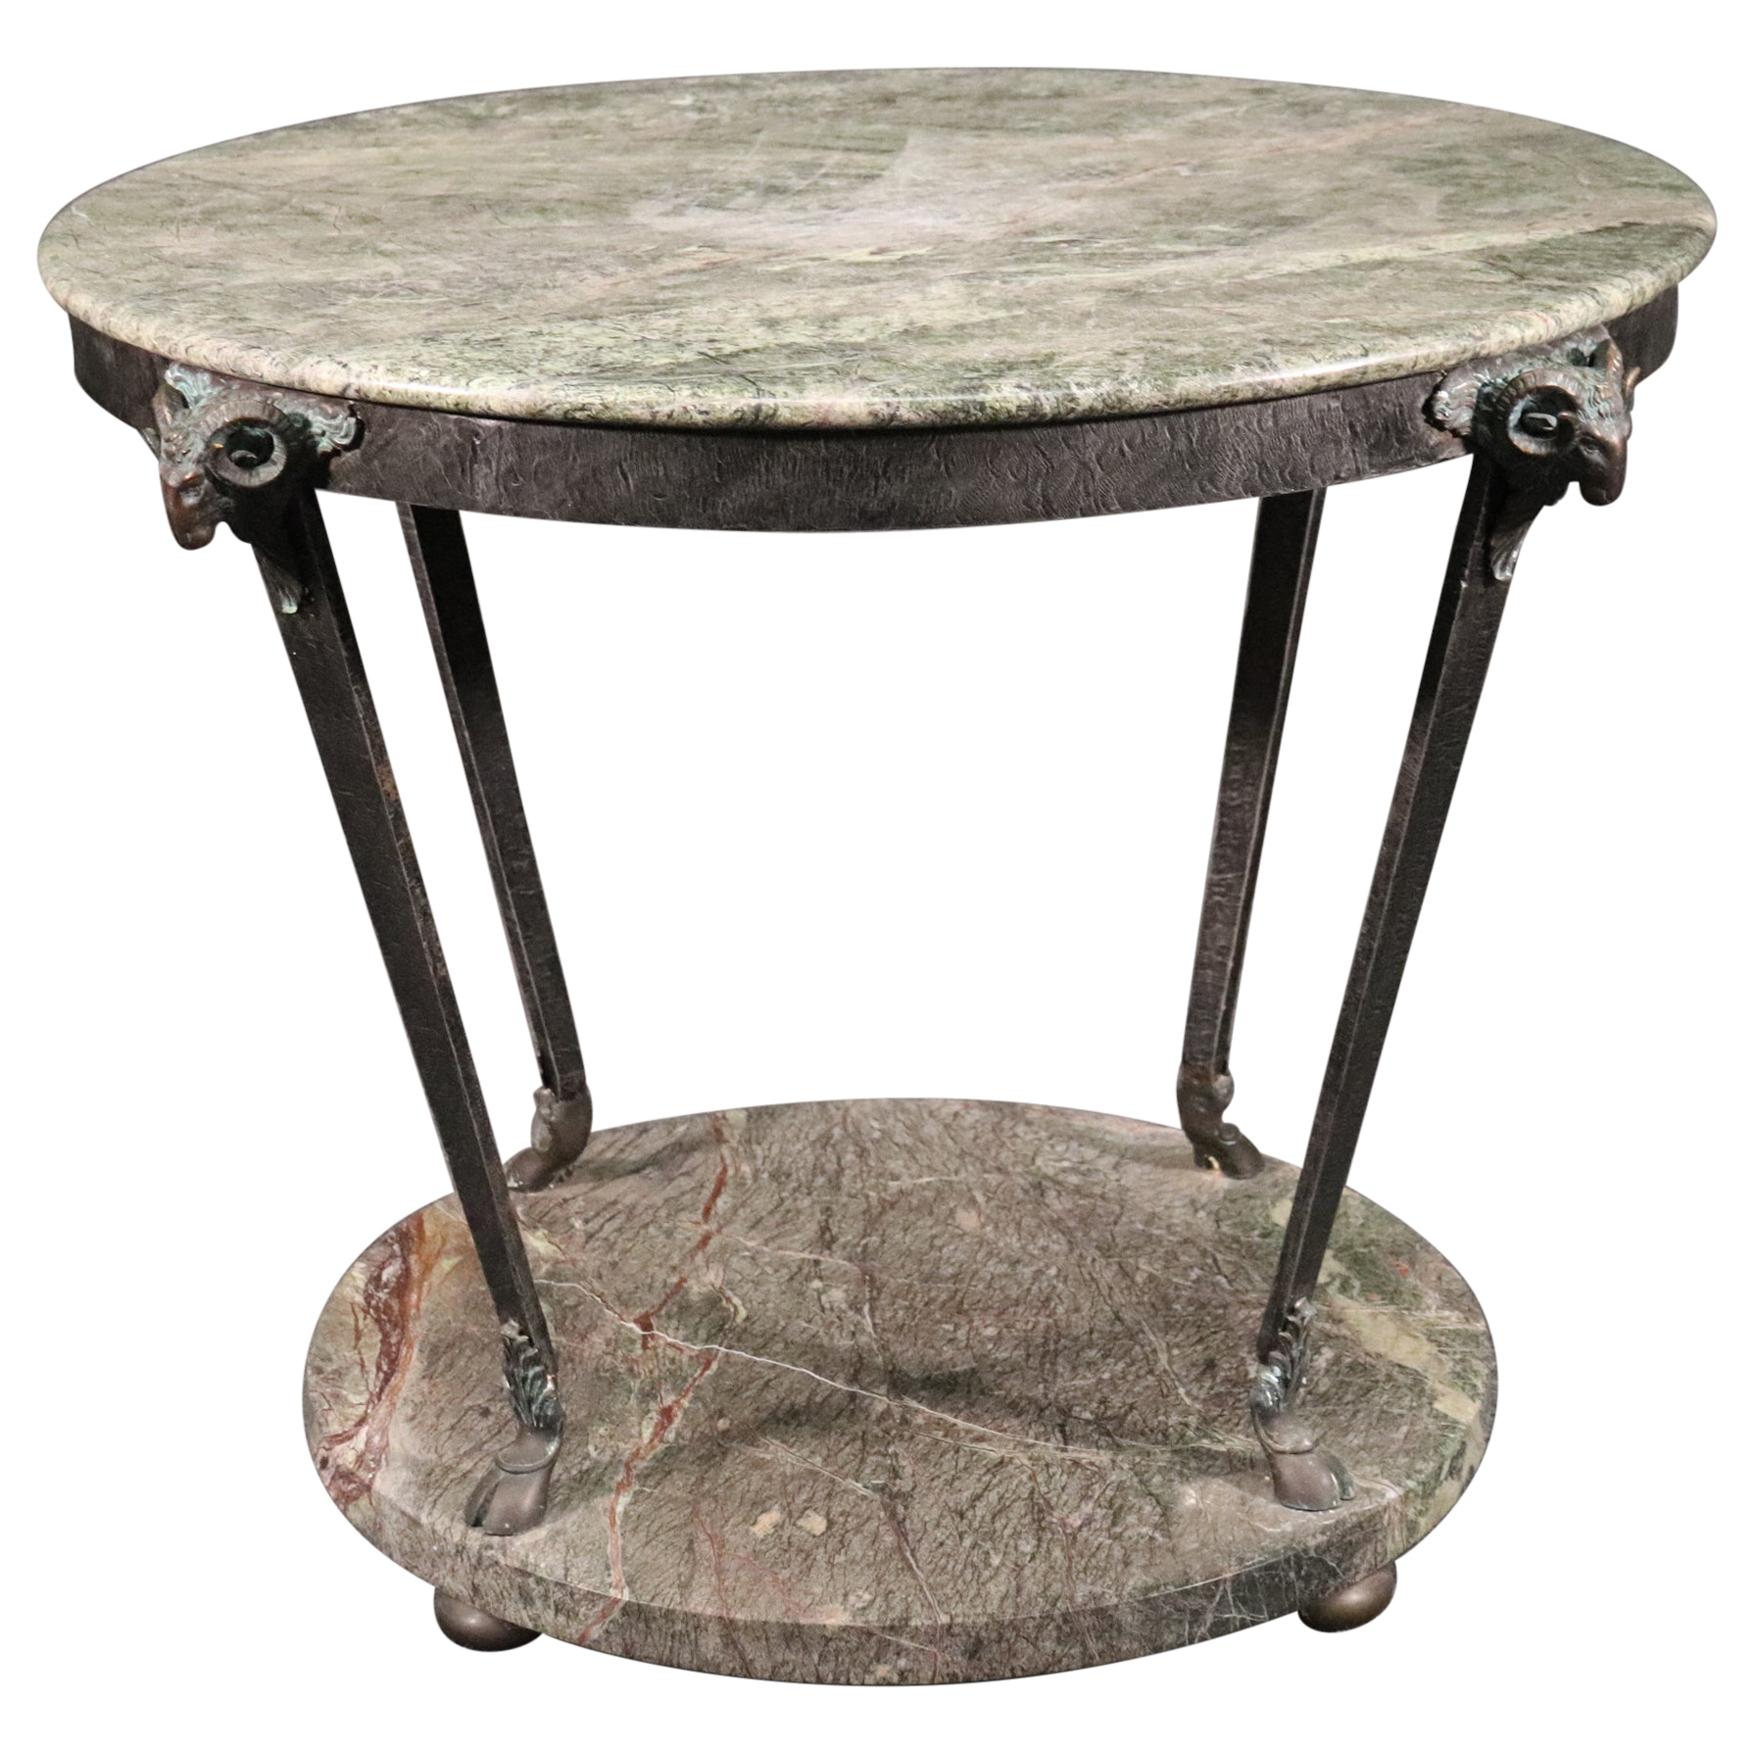 Rare Bronze and Marble French Regency Style Round Center Table